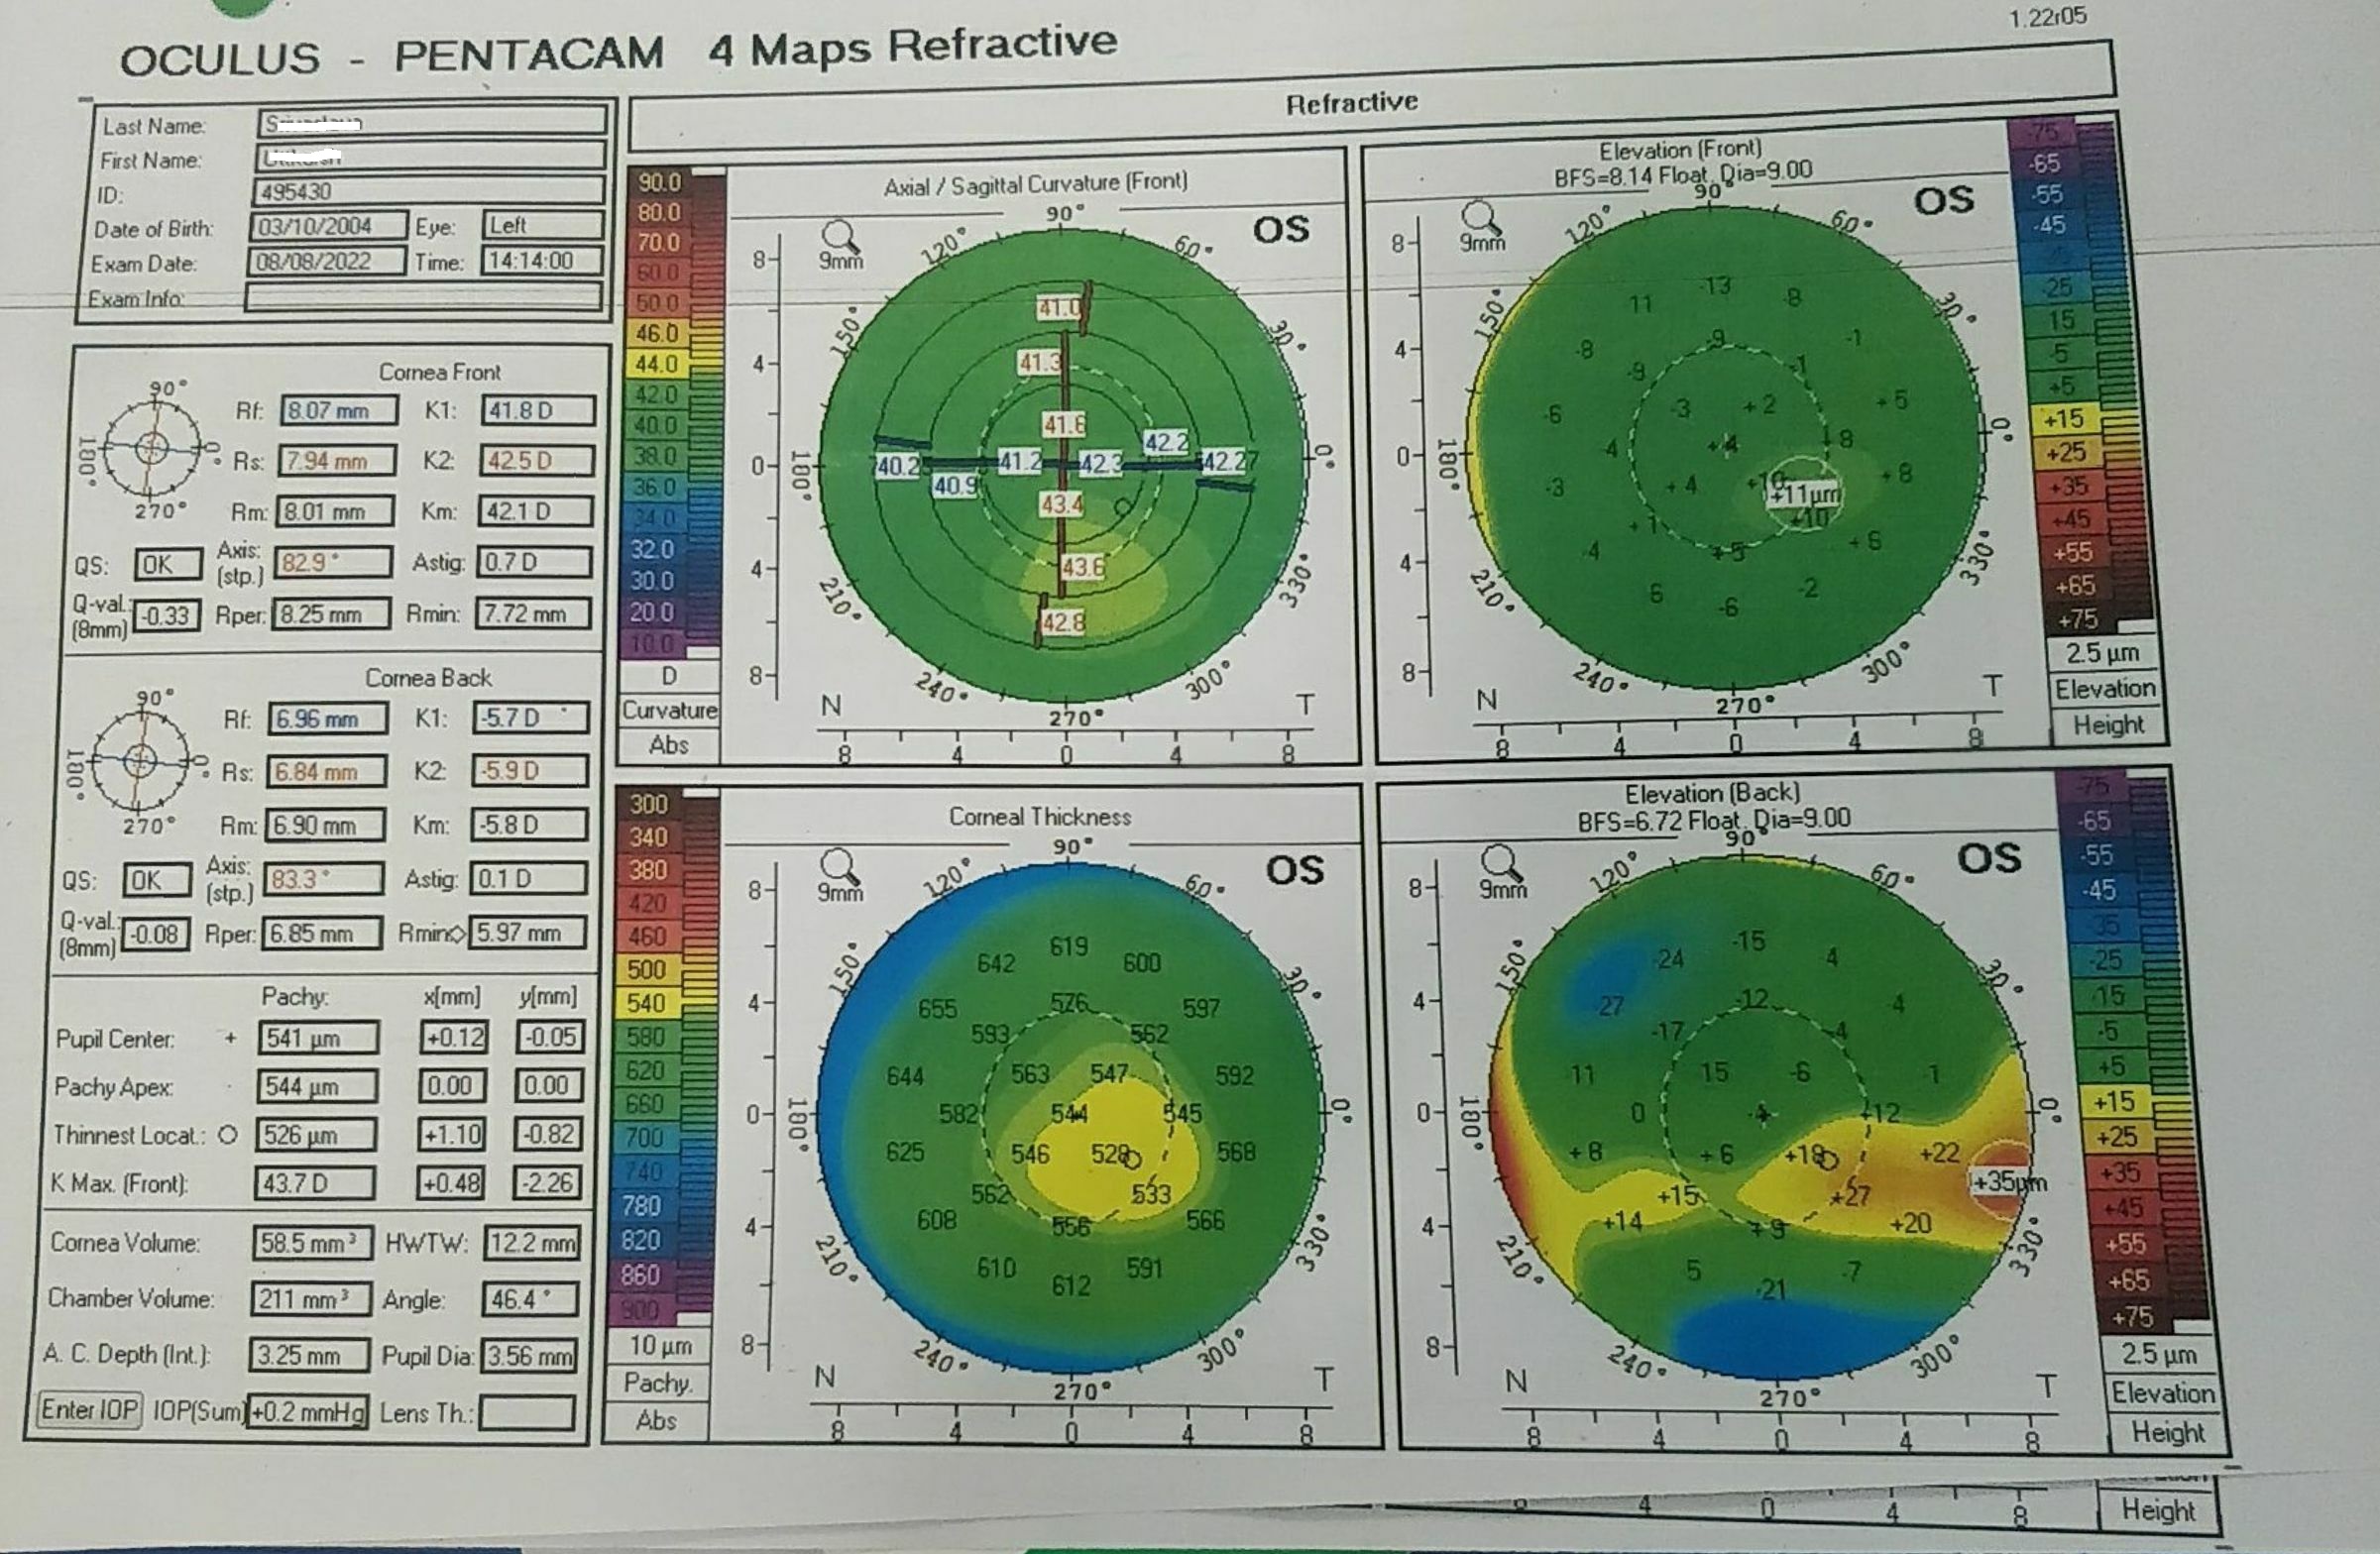 Pentacam 4 map refractive of the left eye of an 18 year old  male . The right eye has advanced keratoconus